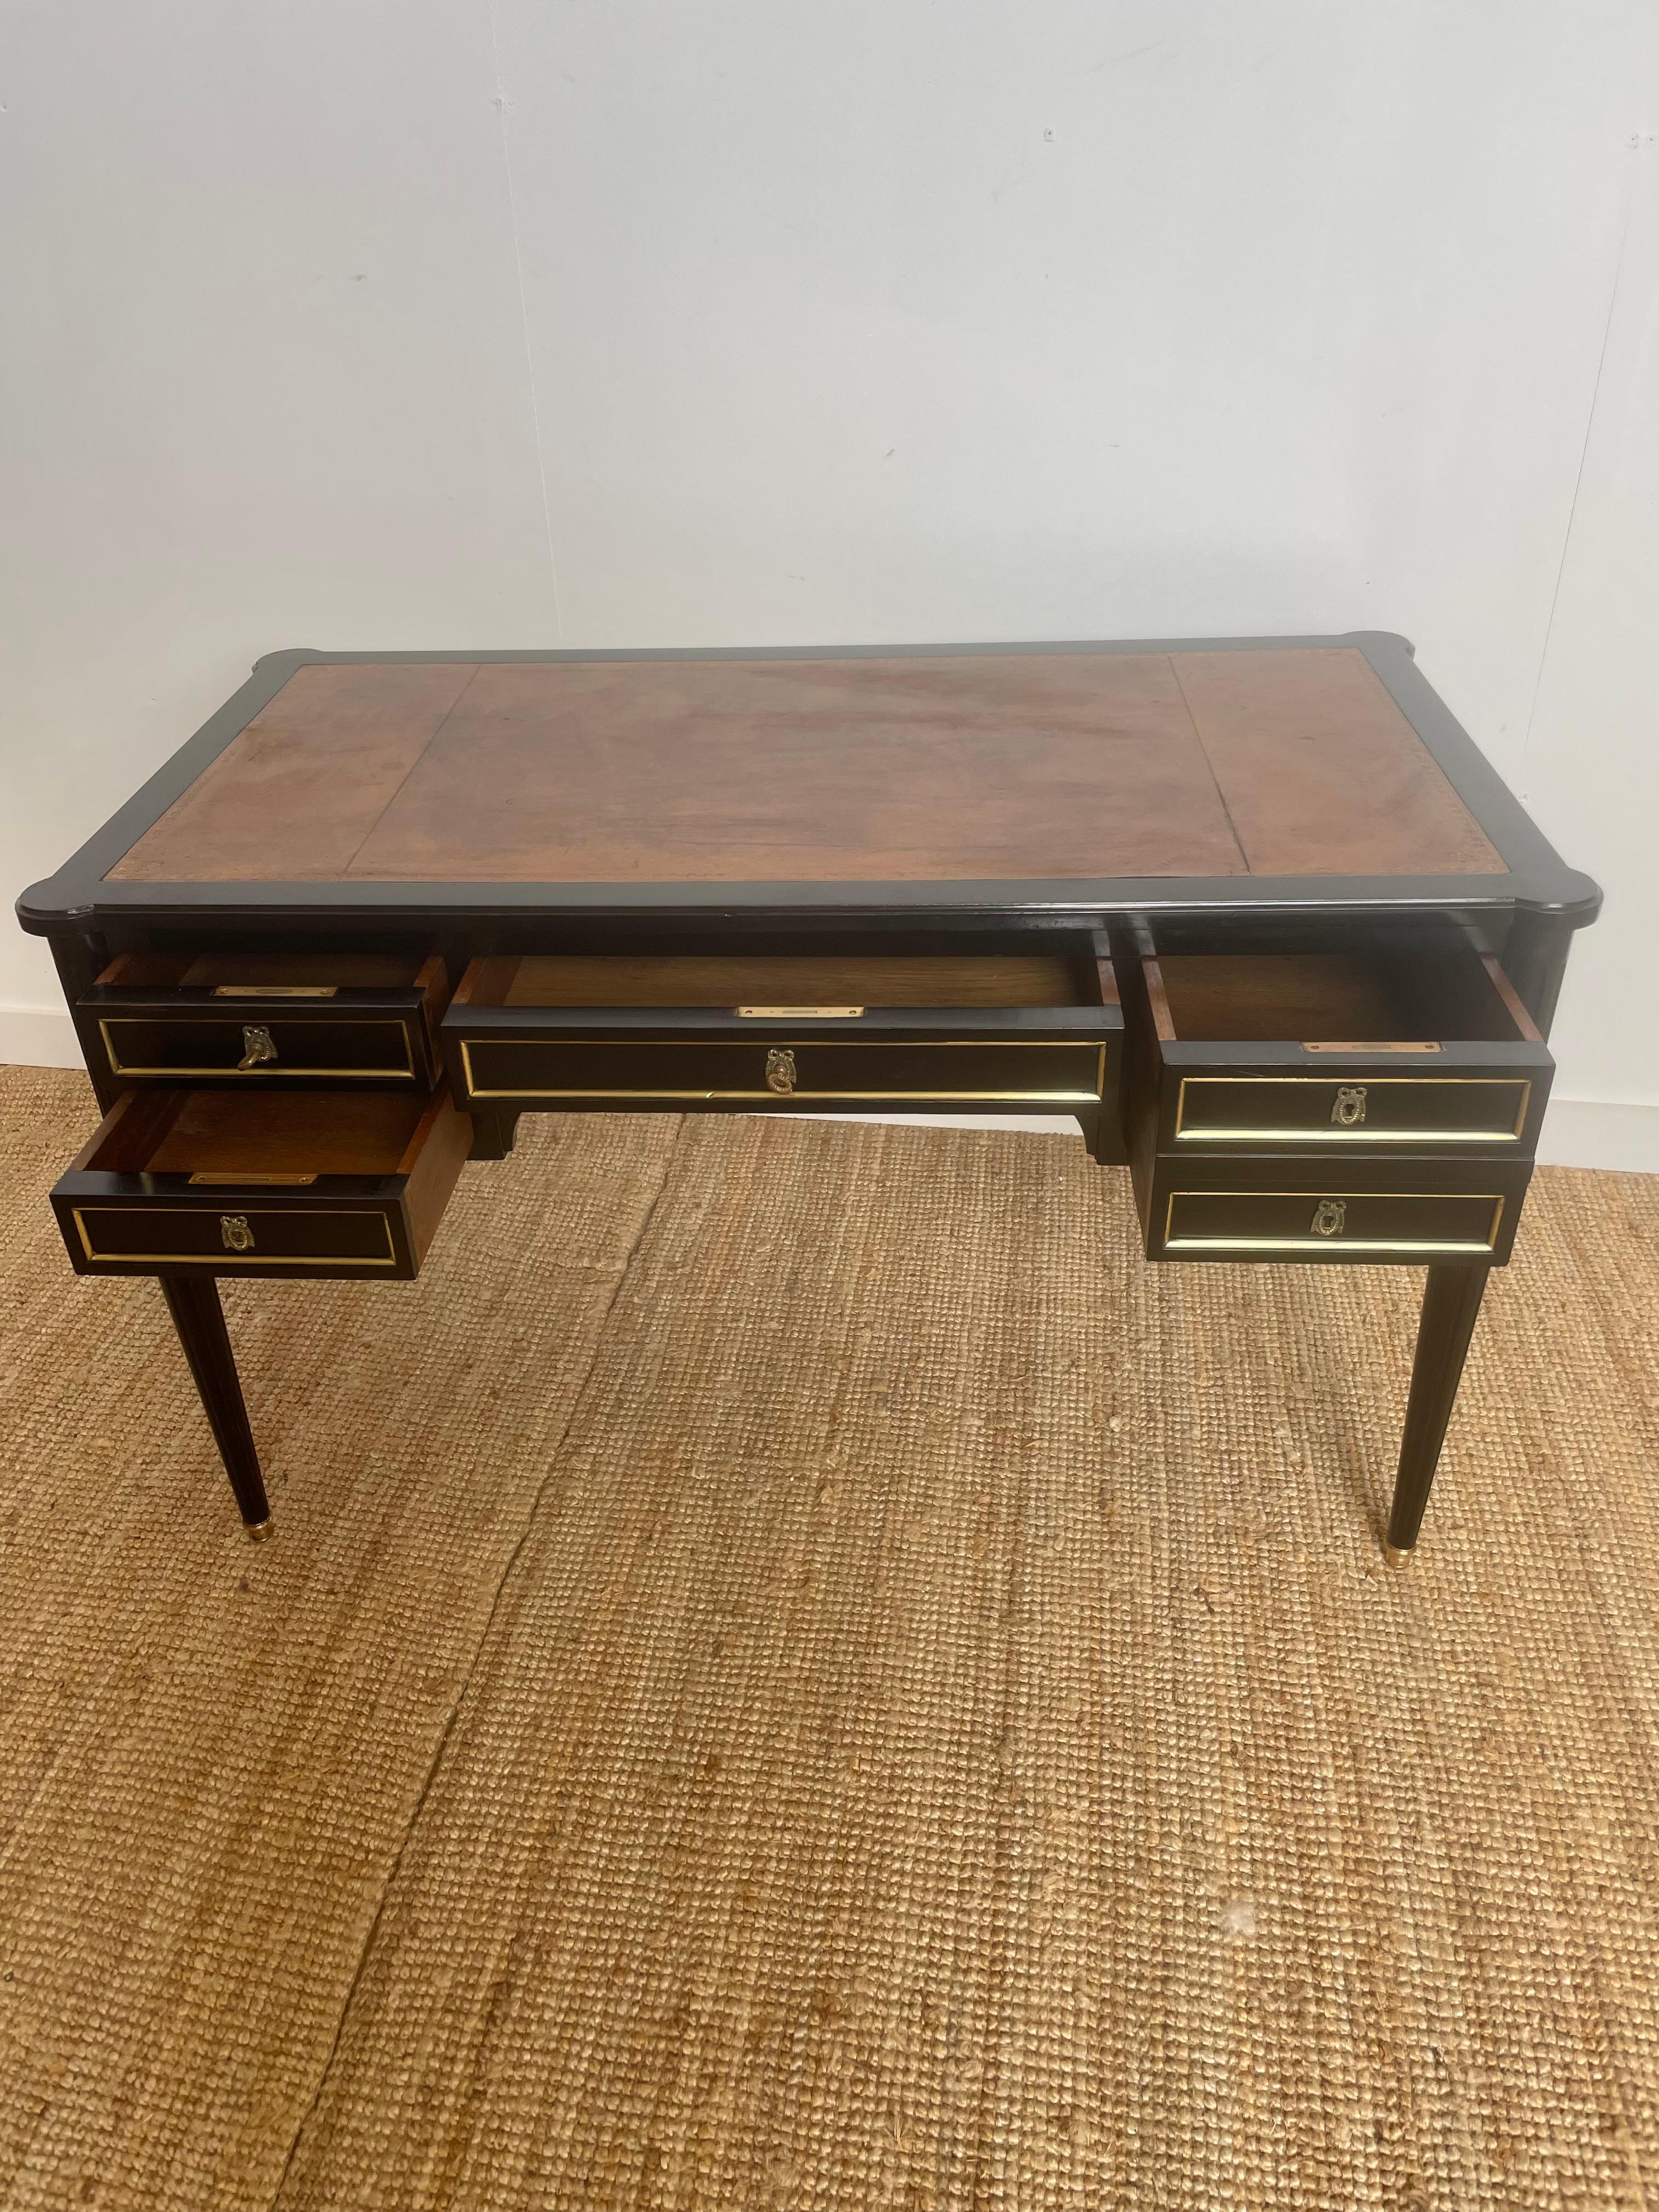 Quality early 20th Century French Louis XVI style writing desk.
Dating to around the 1930’s with original brass mounts and leather inserts and two pull out slides with original leathers. With two keys and working locks.
This piece can free stand in